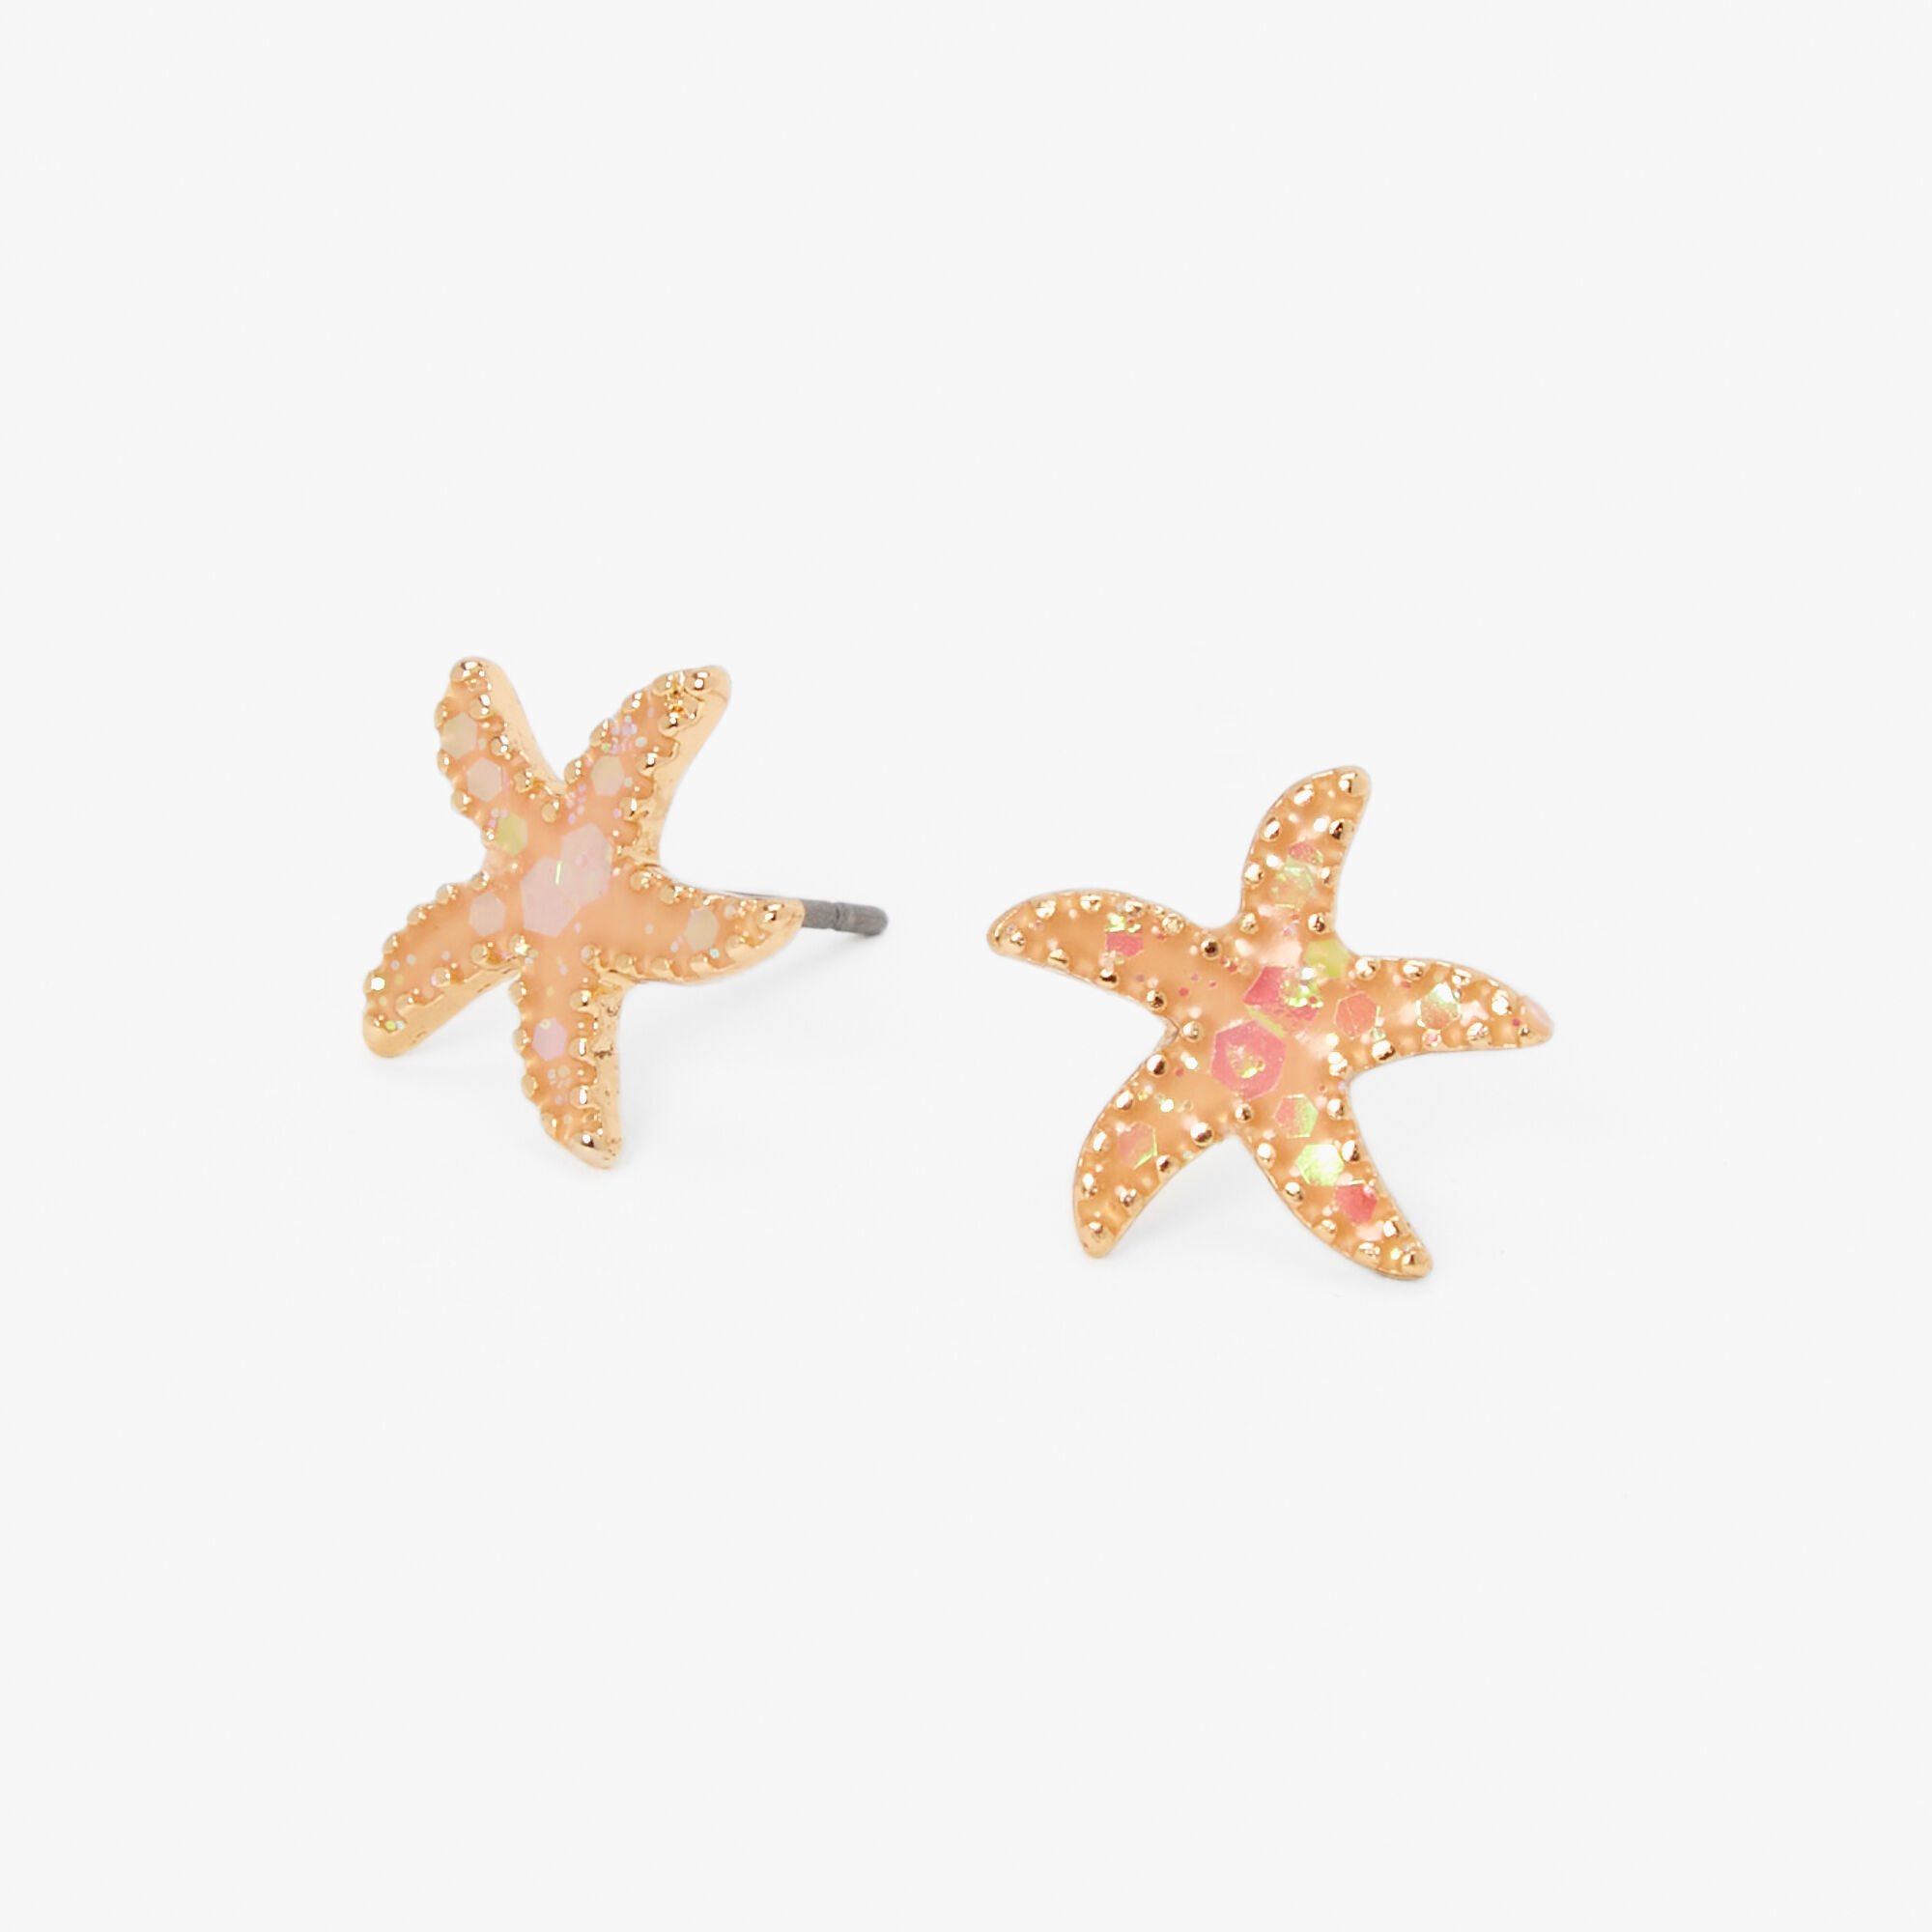 View Claires ColorChanging Uv Starfish Stud Earrings Silver information